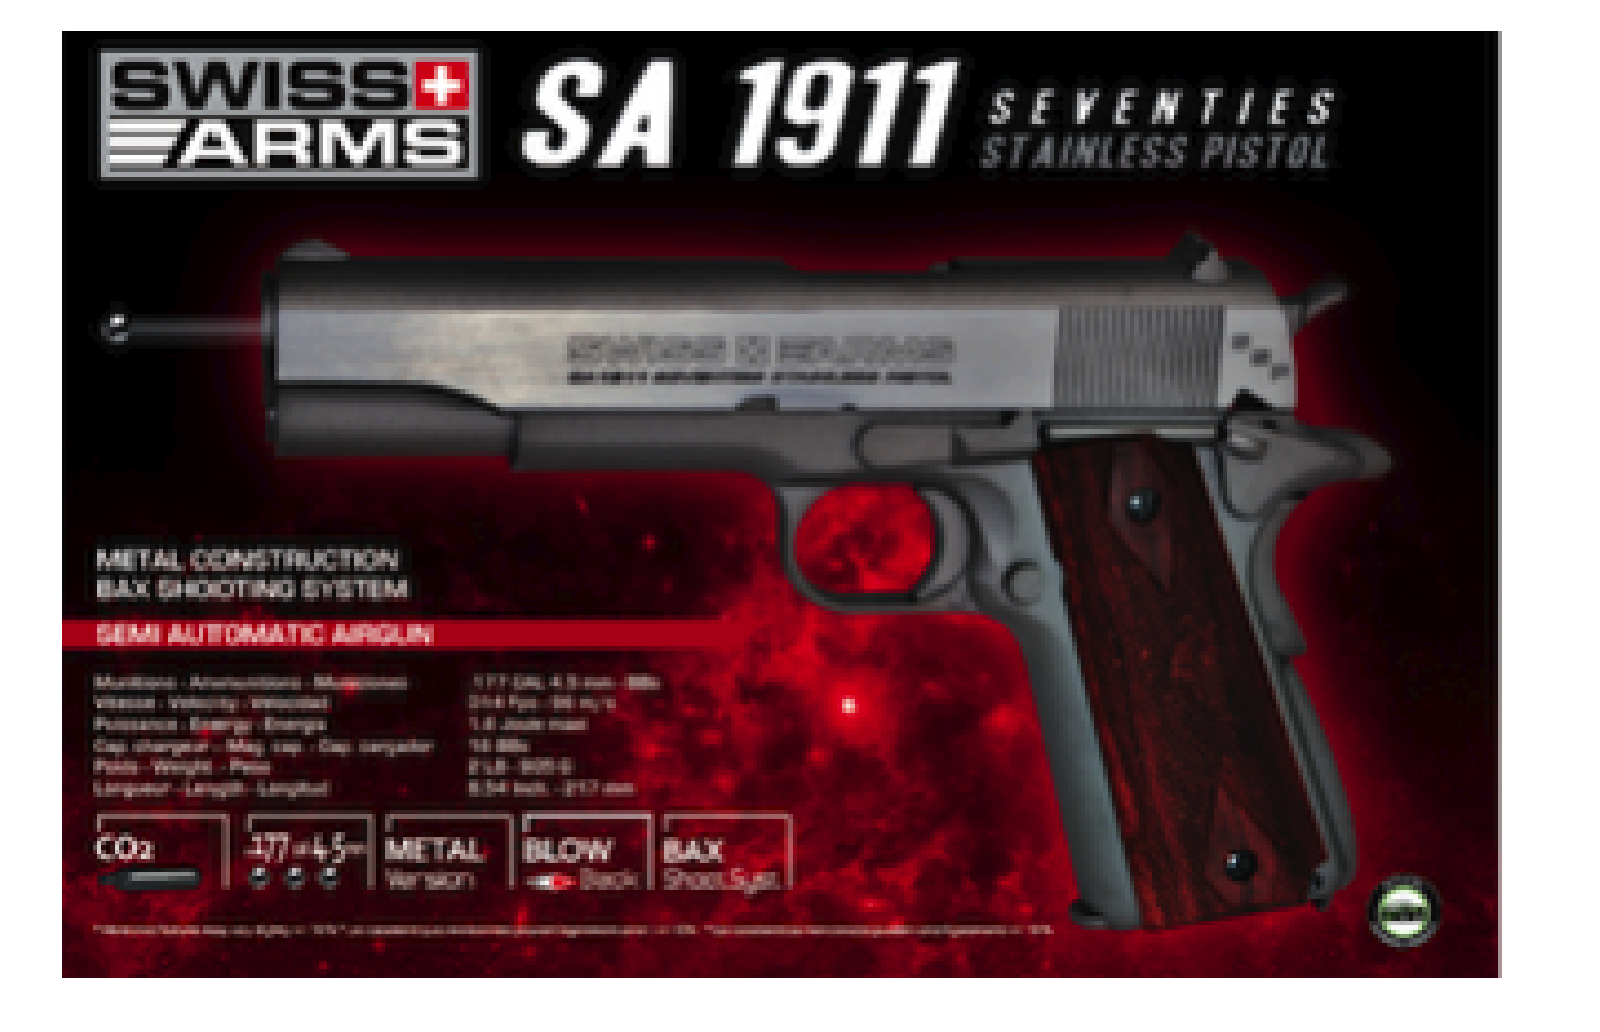 SWISS ARMS 1911 SEVENTIES STAINLESS PISTOL GBB 4.5mm 1.6J /C6